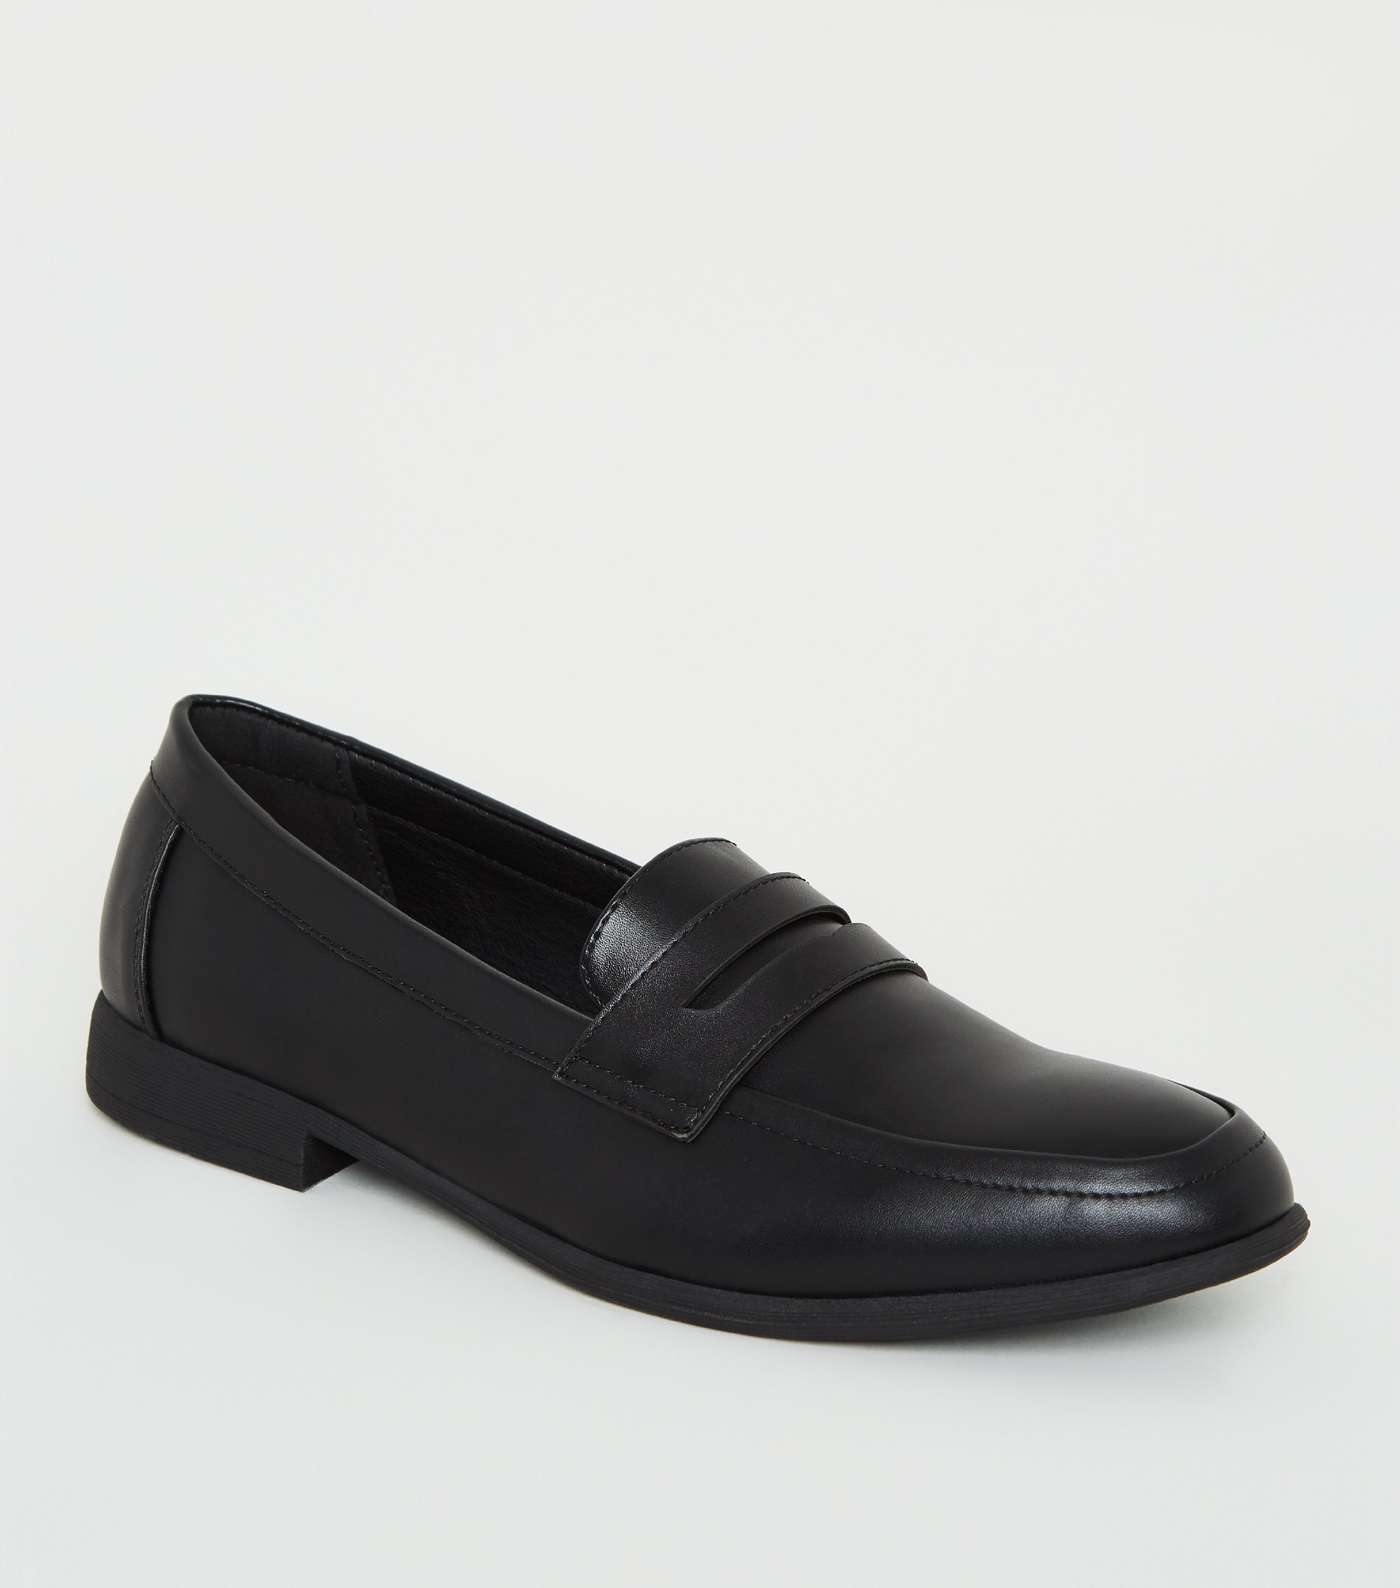 Black Leather-Look Penny Loafers